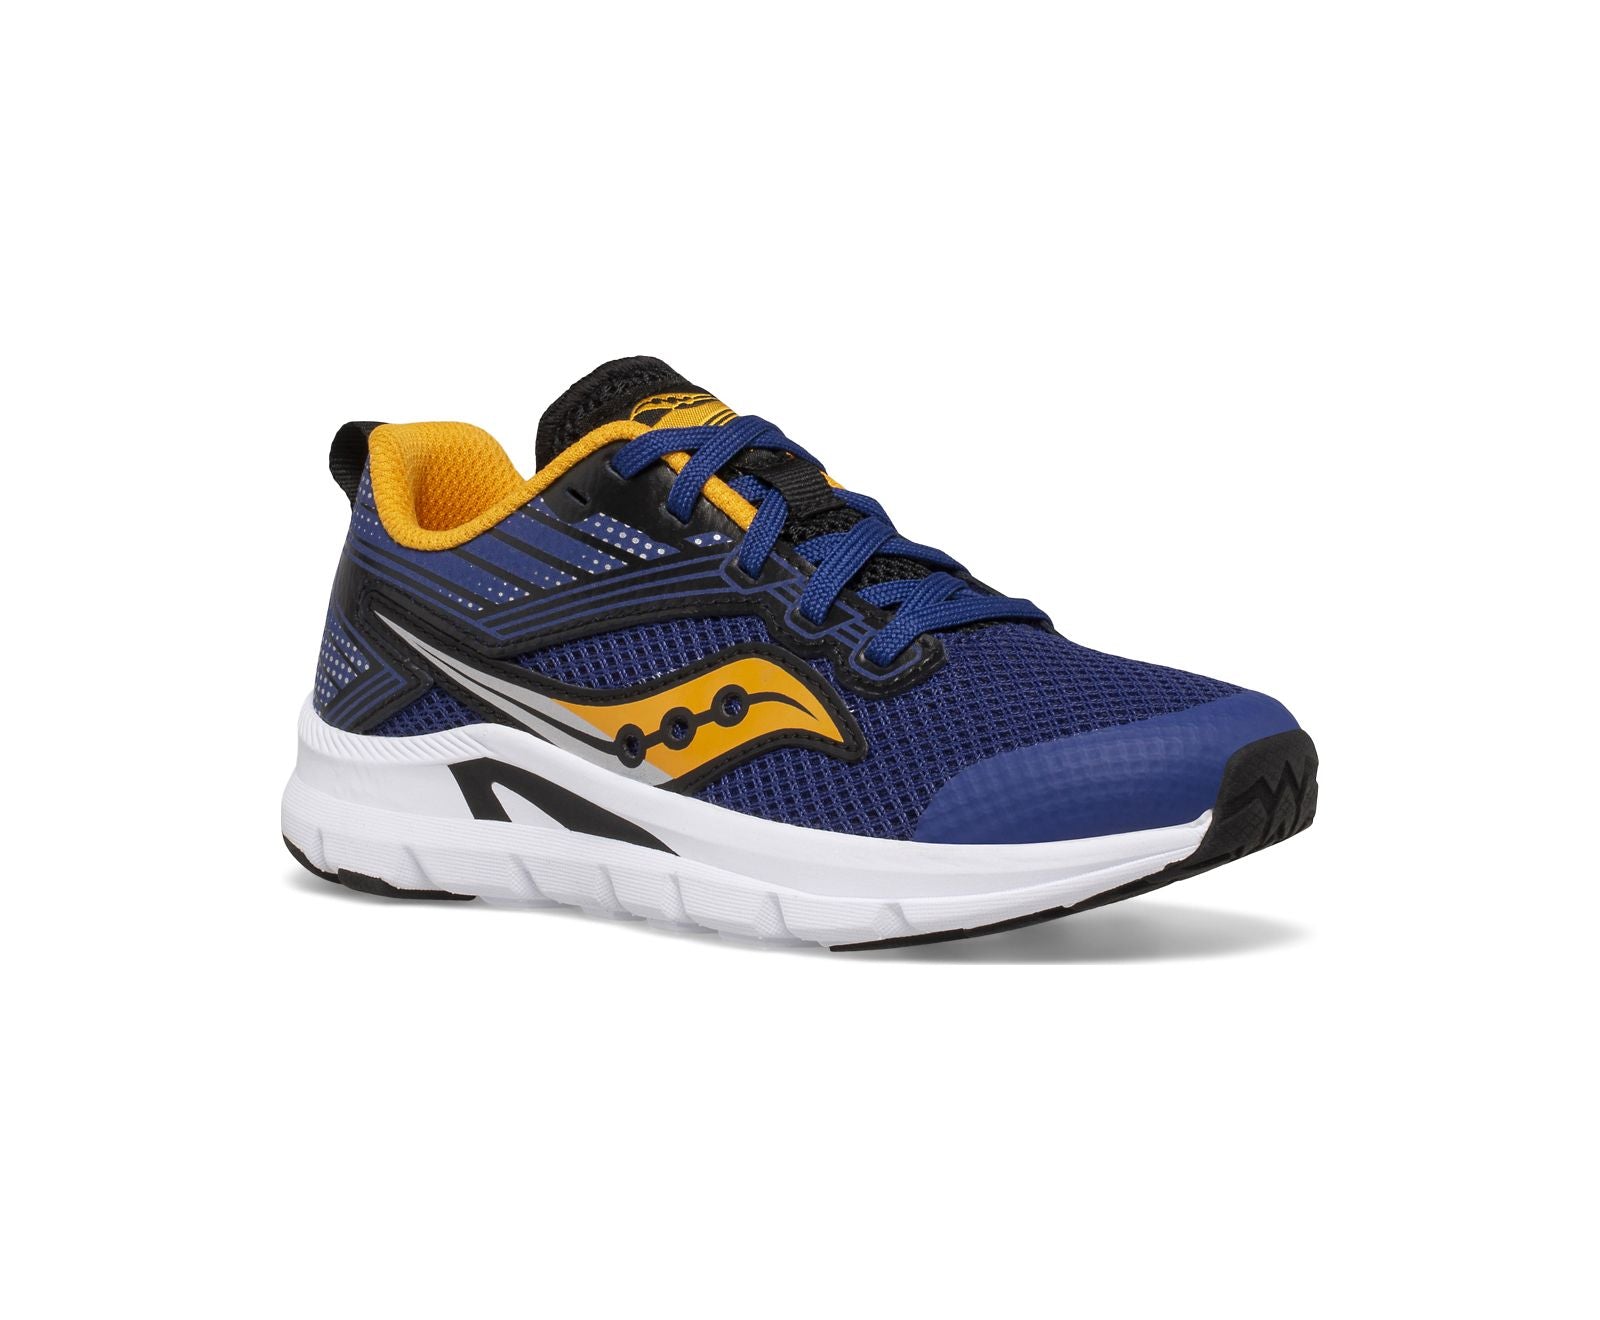 Axon Kid's Athletic Trainer - Navy/Gold